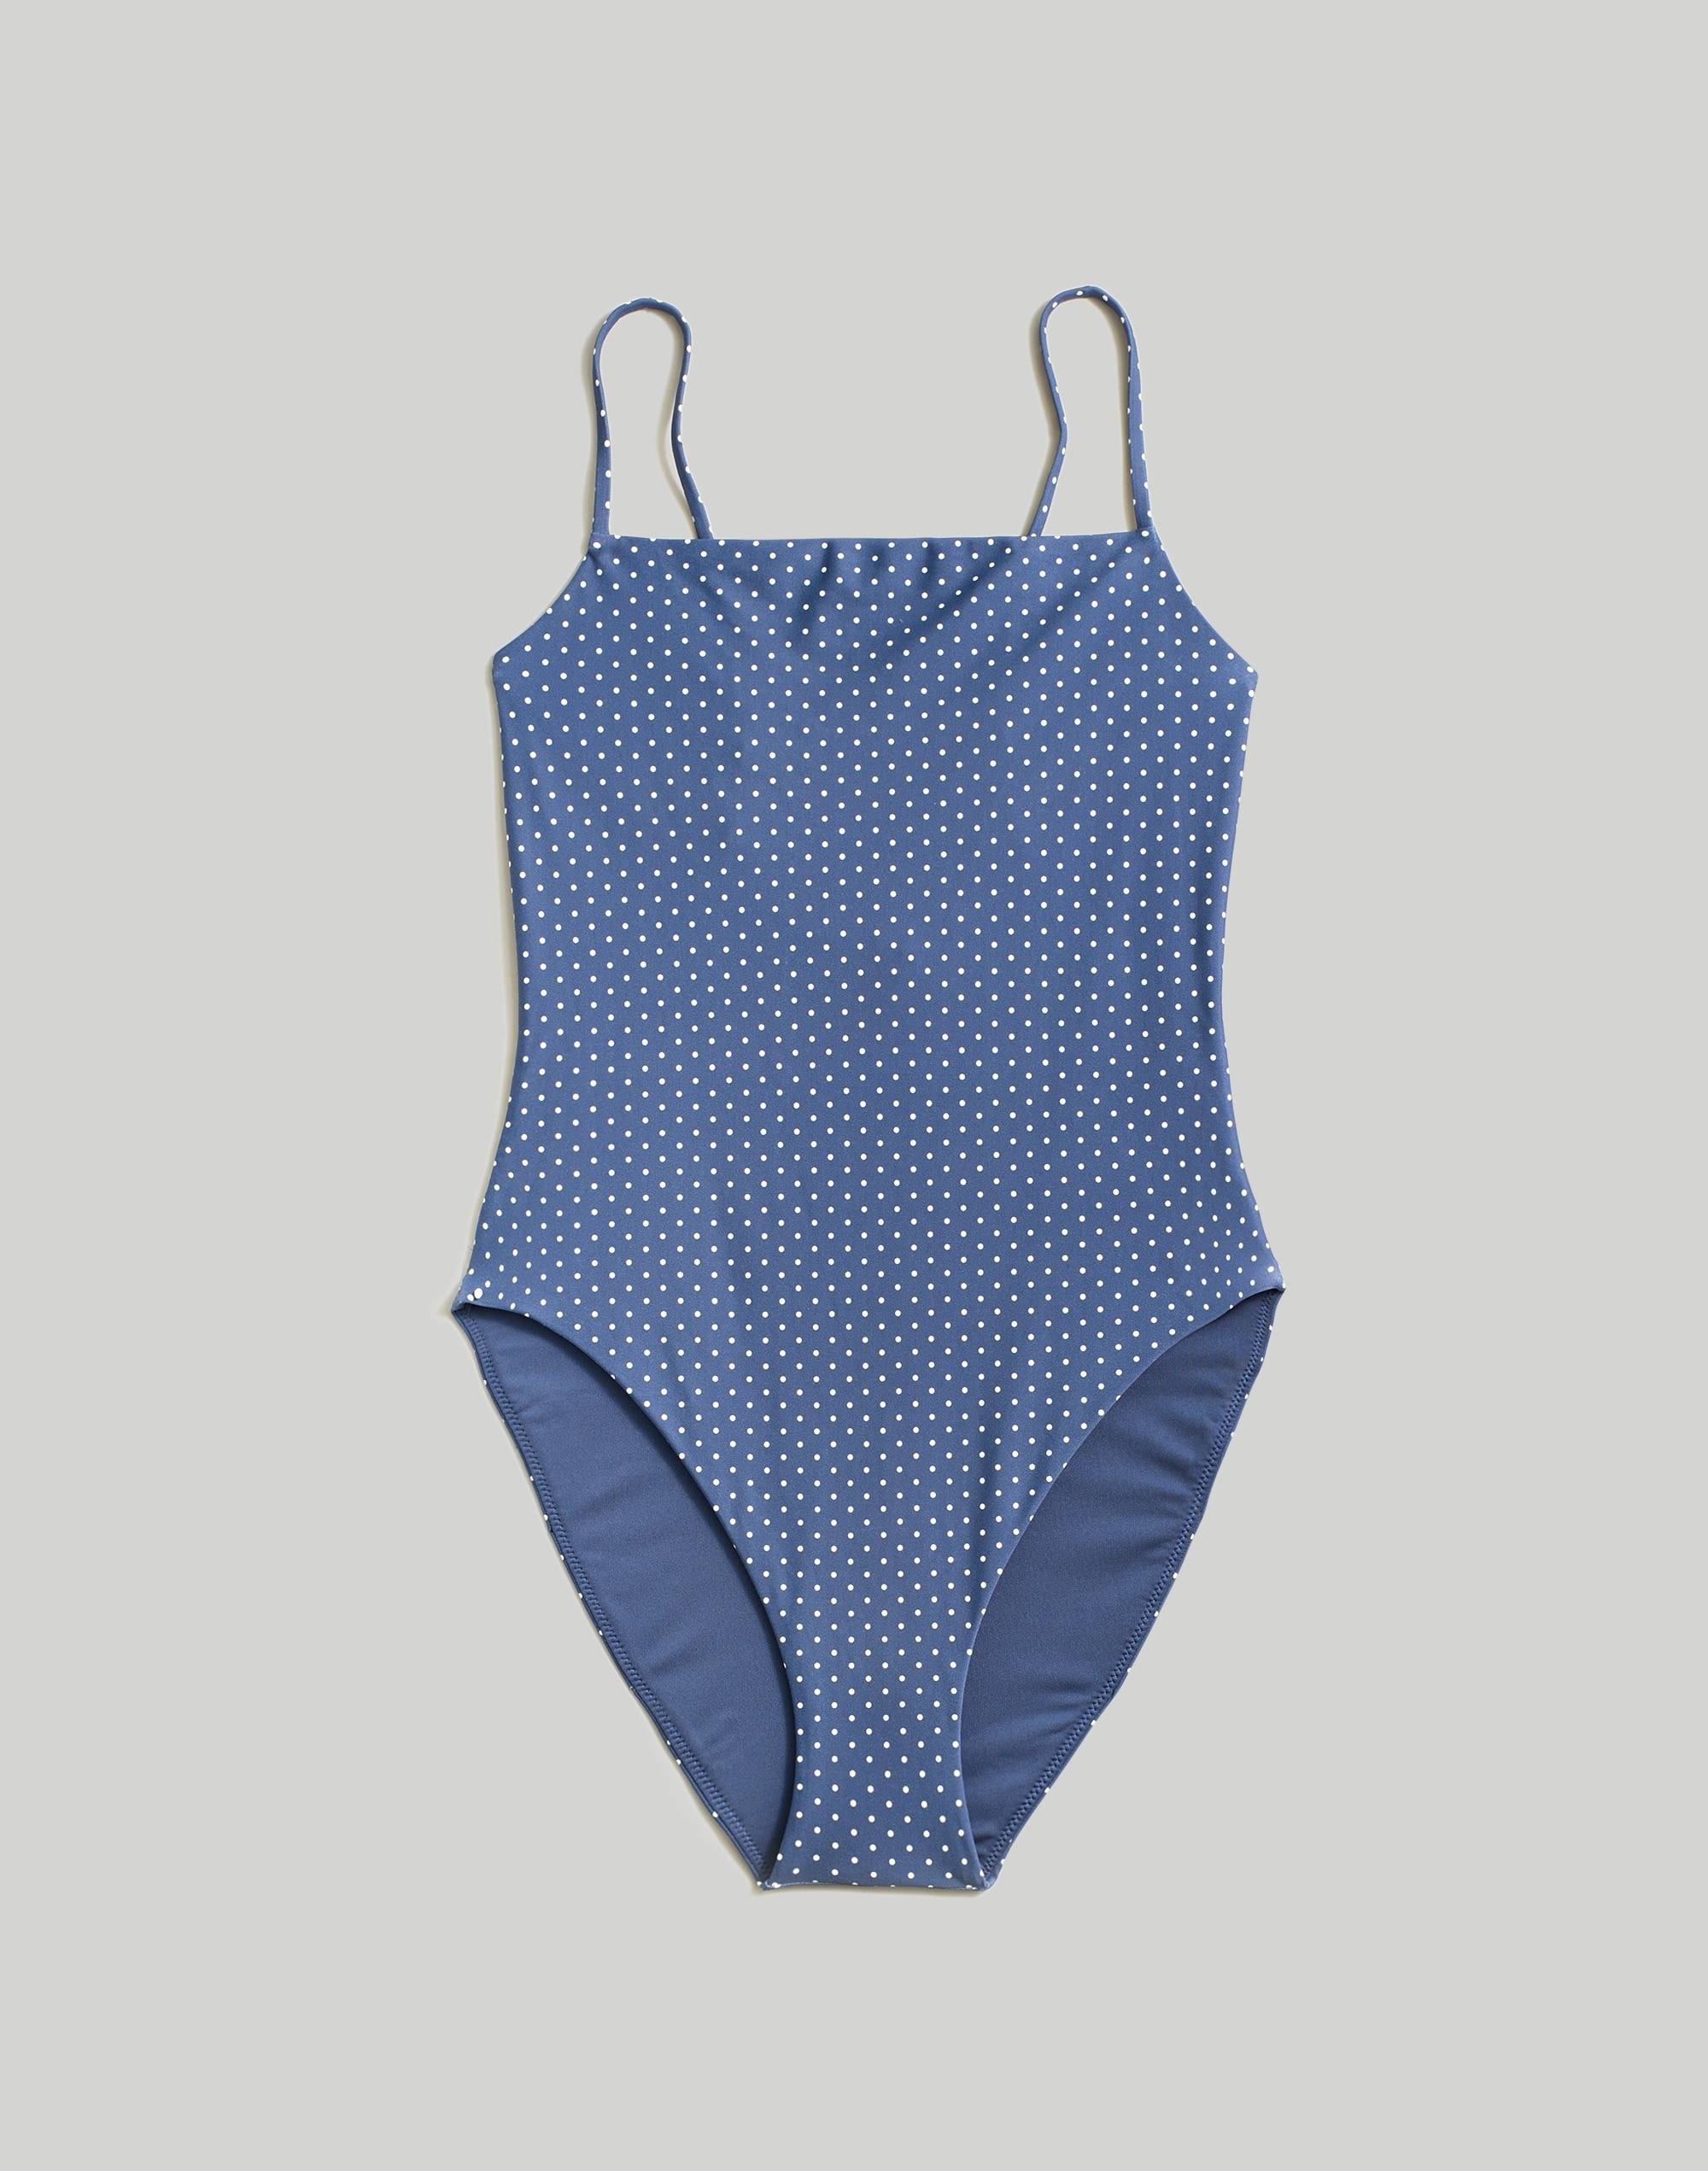 Square-Neck One-Piece Swimsuit Polka Dot